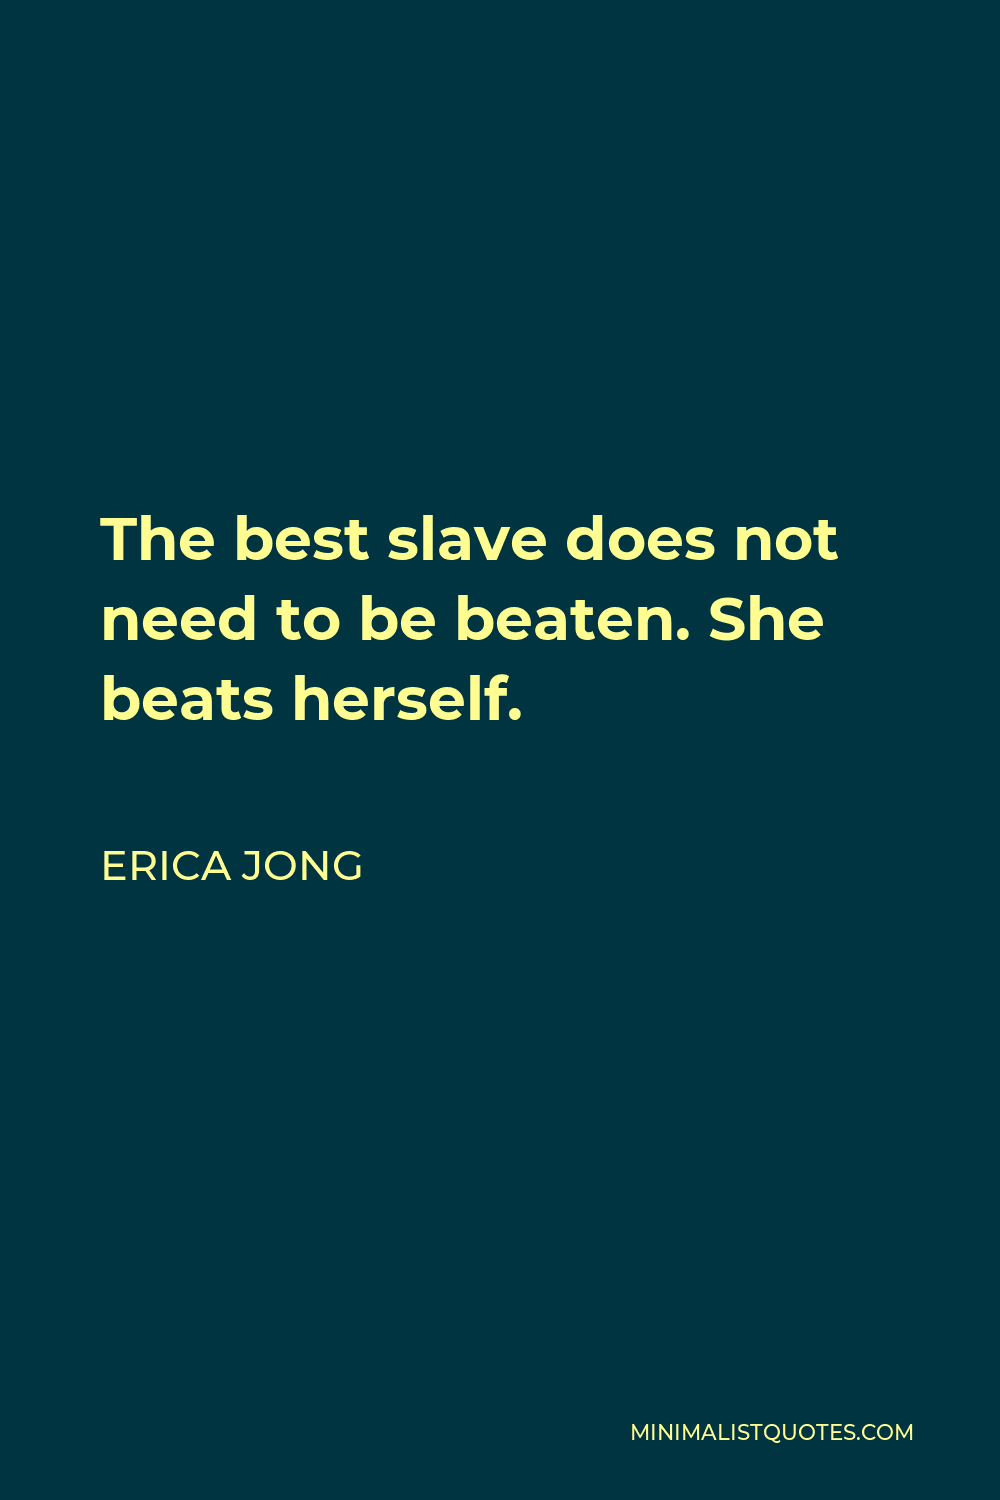 Erica Jong Quote - The best slave does not need to be beaten. She beats herself.